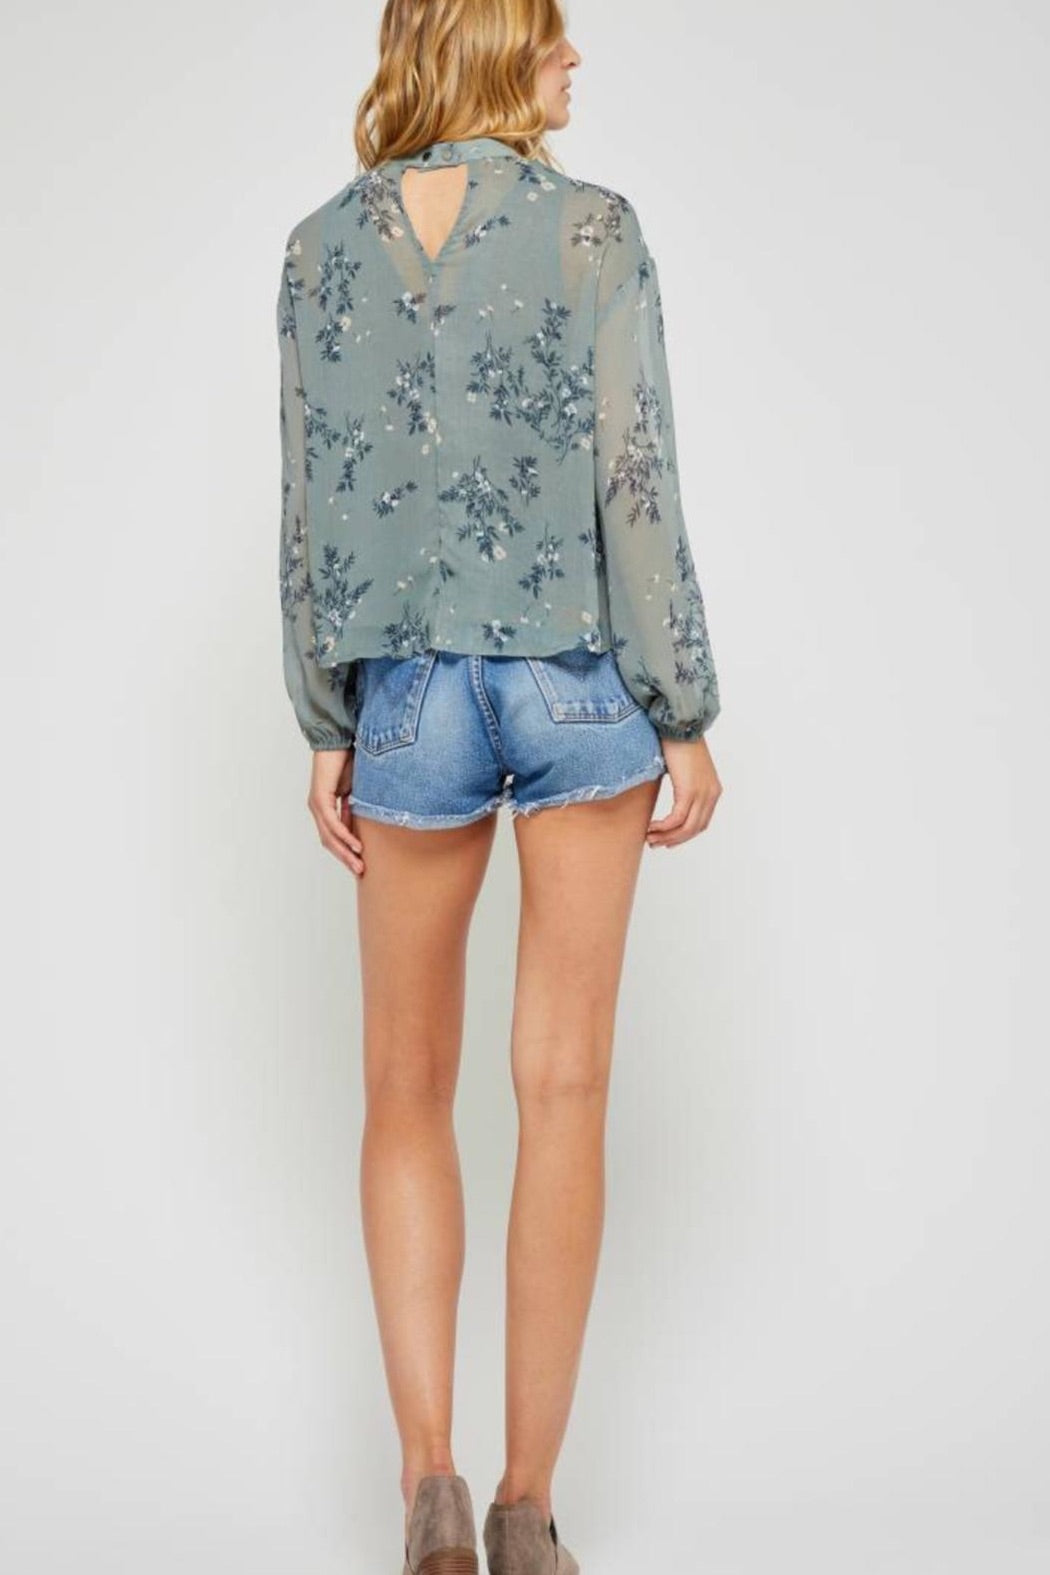 Gentle Fawn Floral Blouse